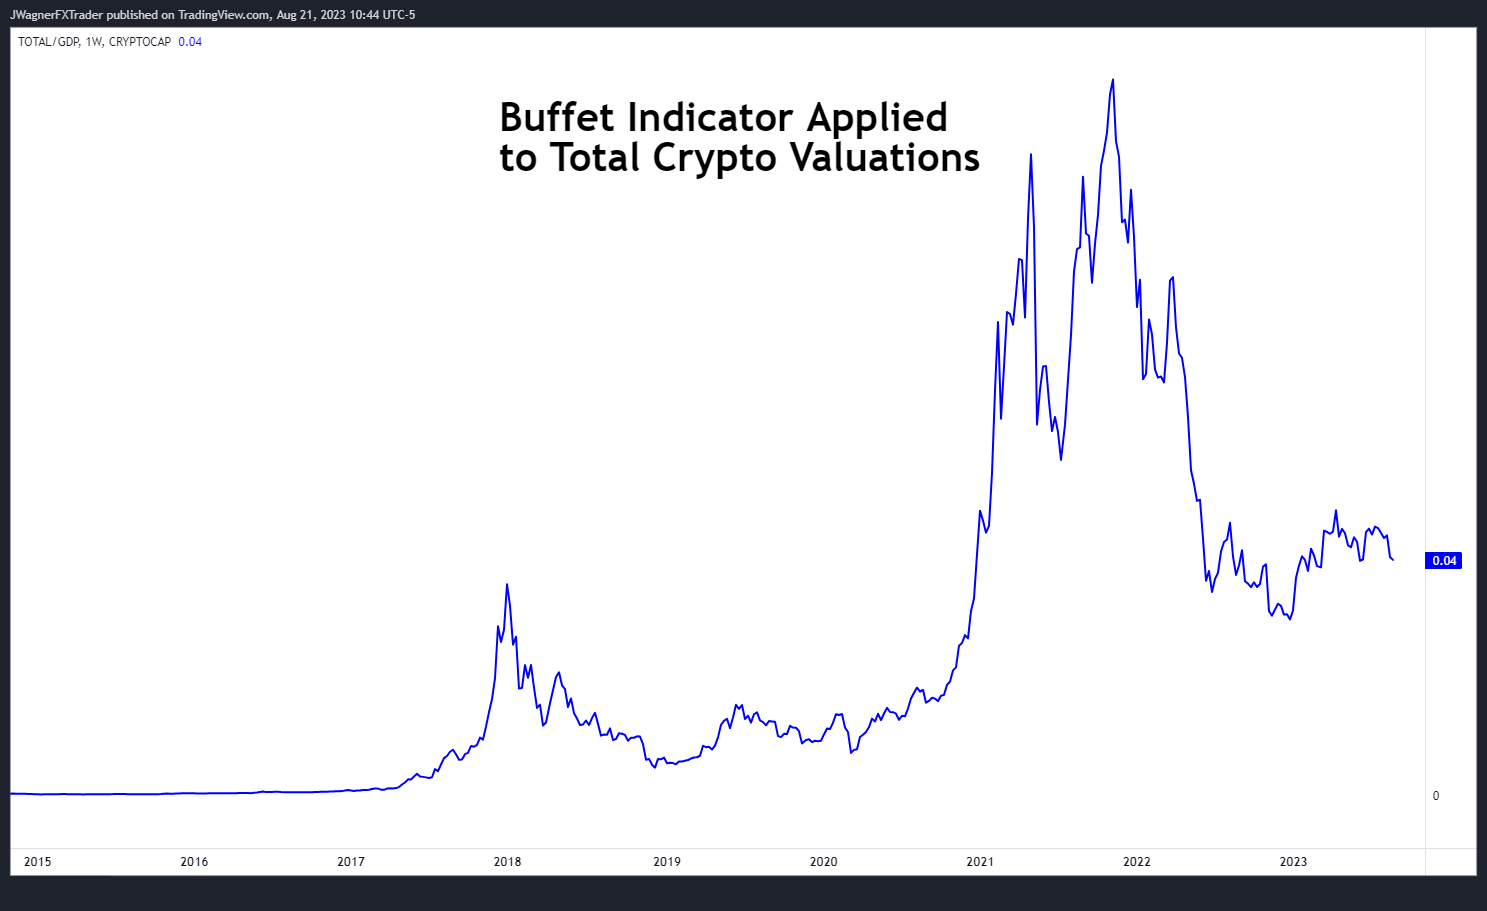 Buffett Indicator applied to Total Crypto Valuations from 2015 to 2023